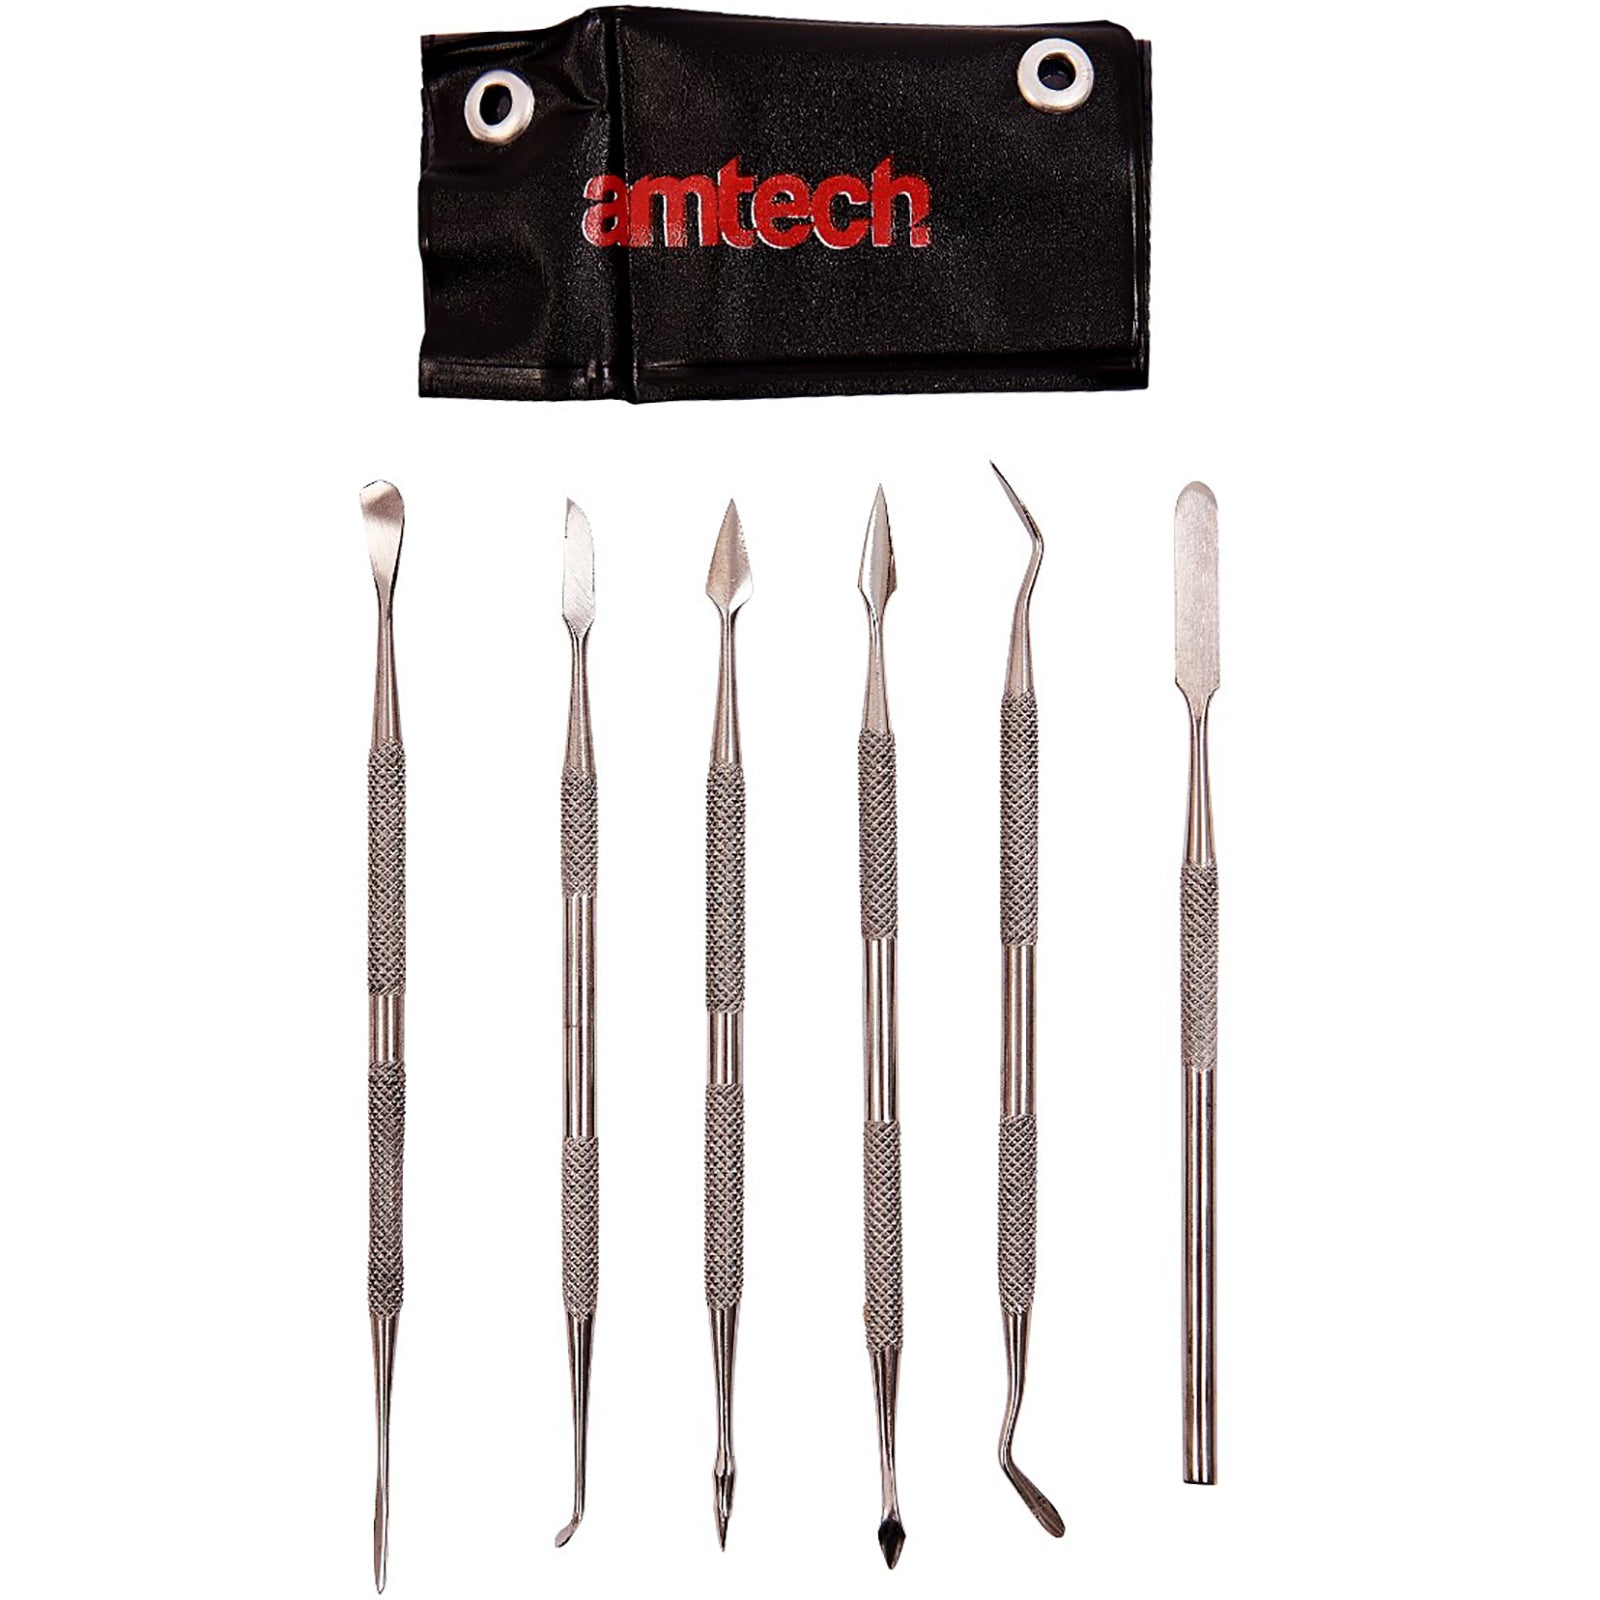 Amtech 6 Piece Stainless Steel Wax Carving Set